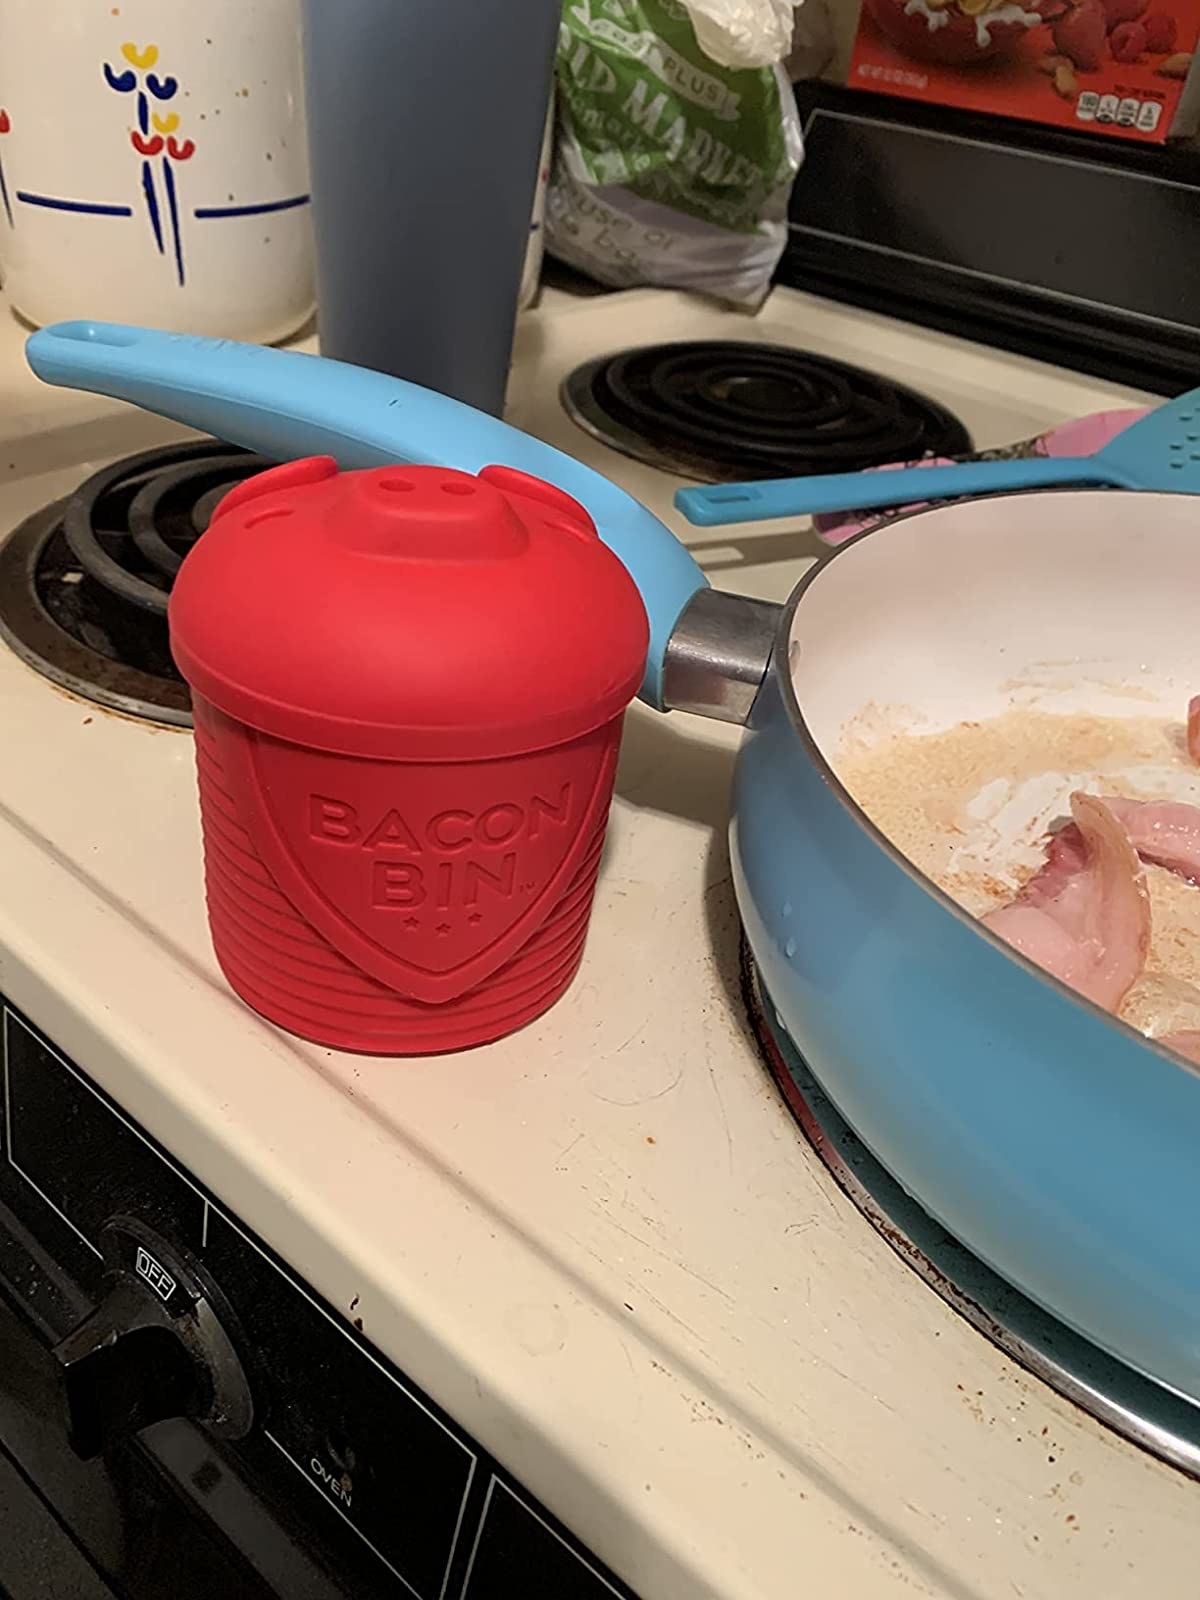 reviewer showing the bacon bin on a stove